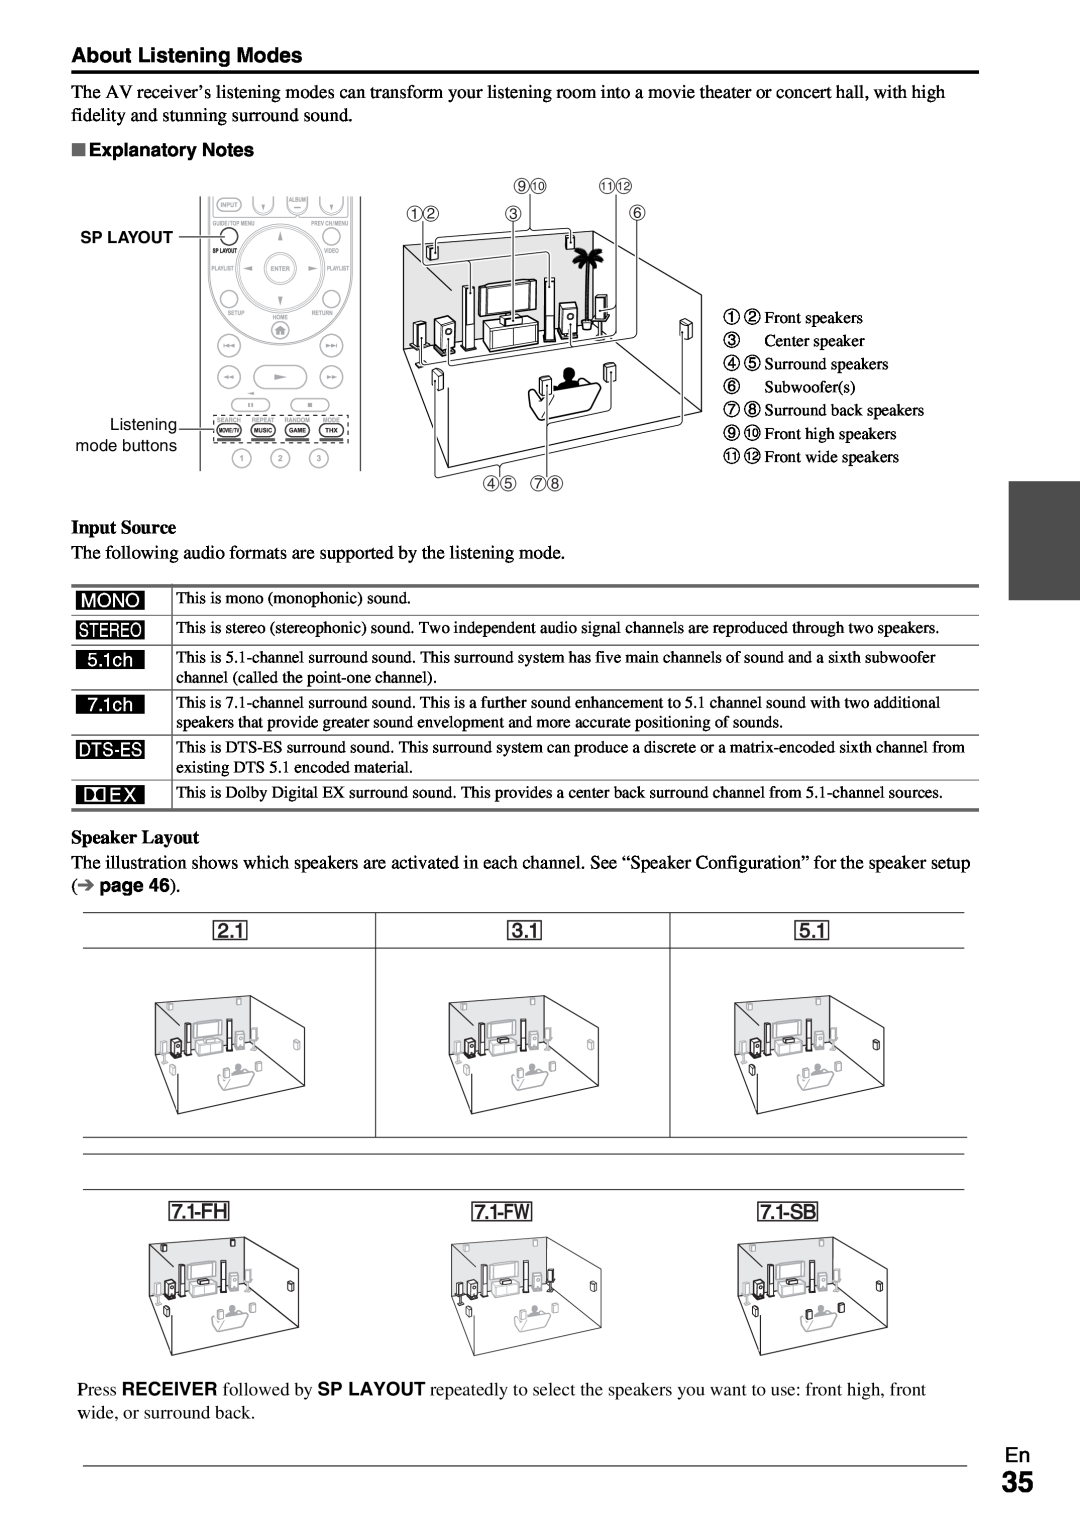 Onkyo HT-RC370 instruction manual About Listening Modes, Explanatory Notes 